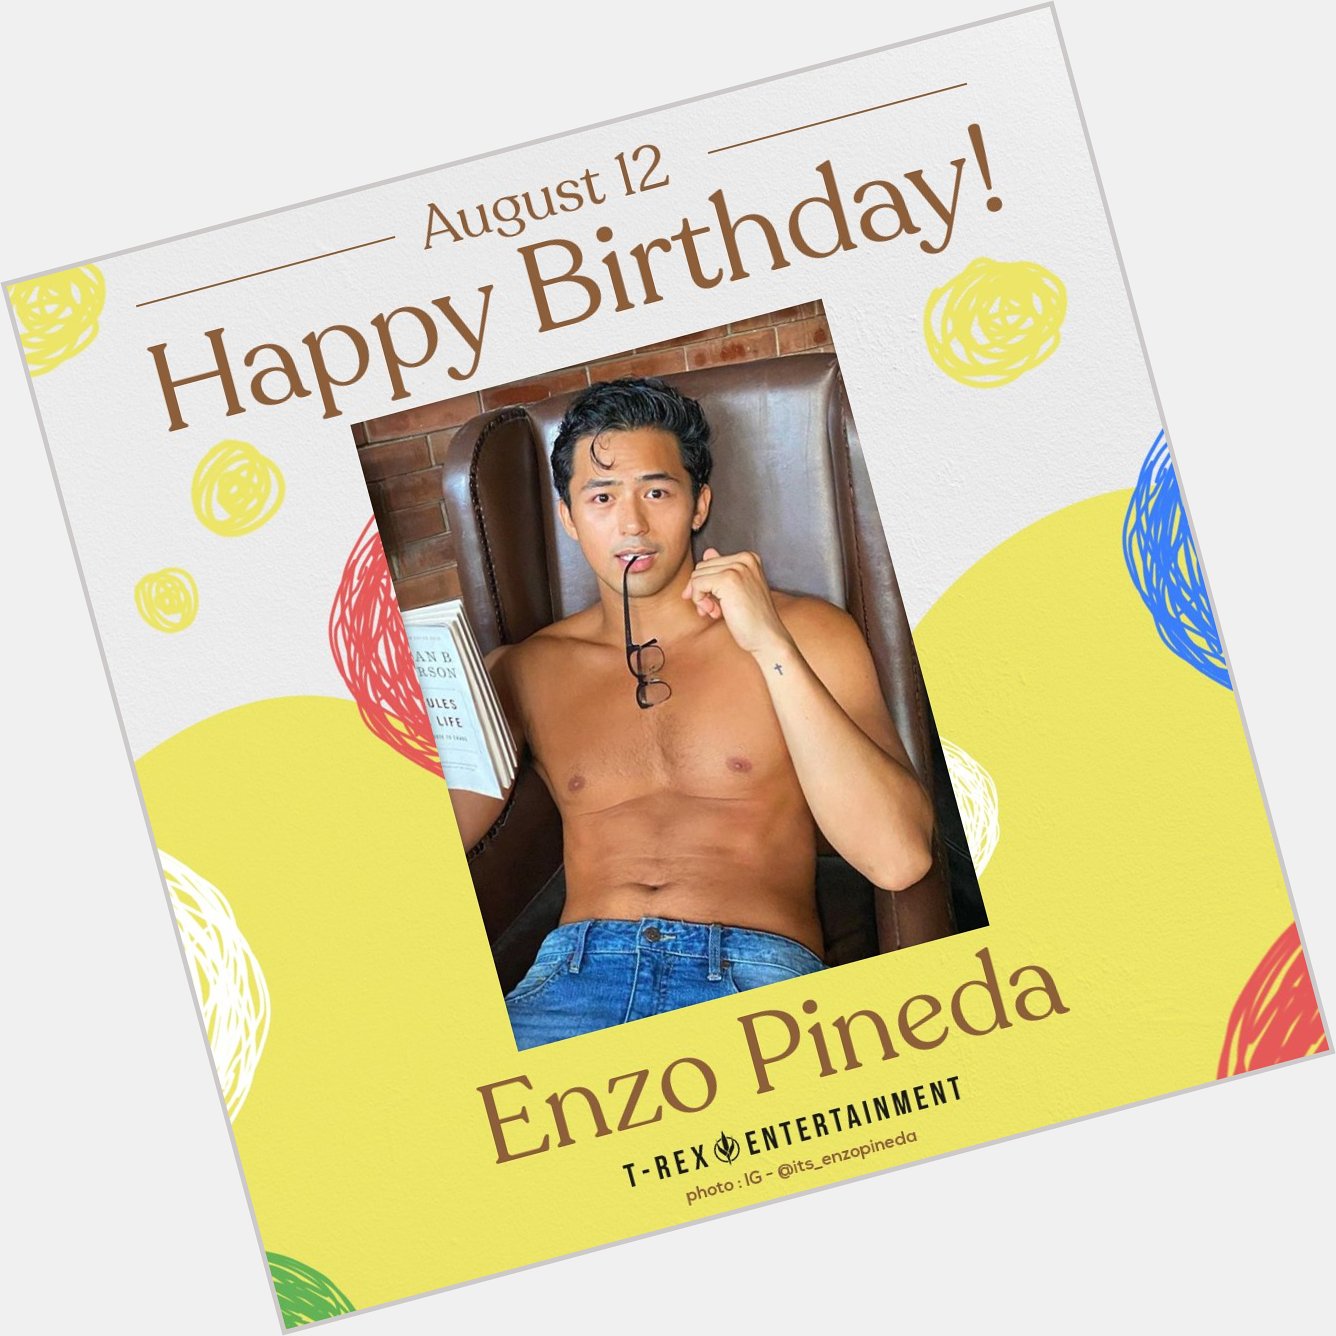 Happy 30th birthday, Enzo Pineda Wishing you a blessed year to come. Enjoy your day!   